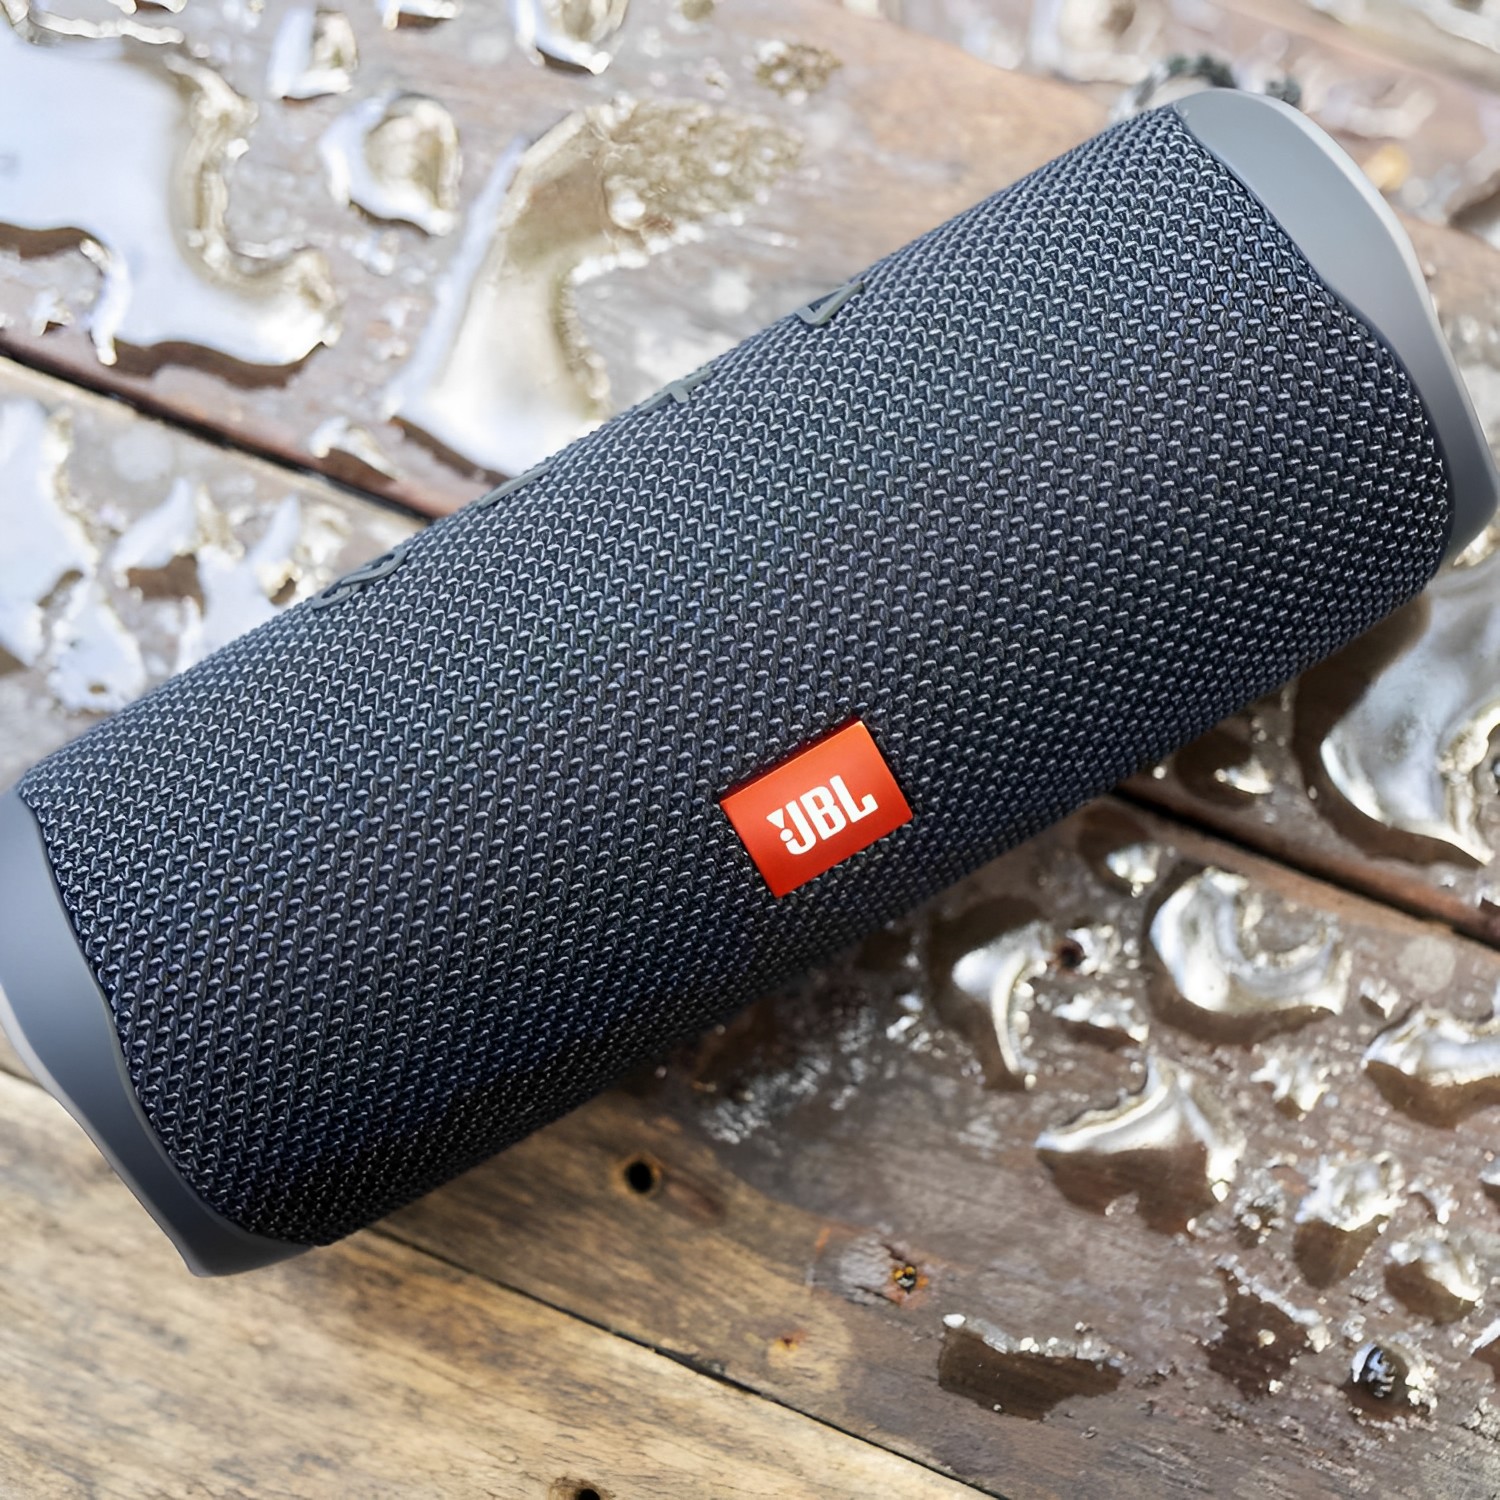 Buy a JBL FLIP 5 Portable Waterproof Speakers from Gadget Garage BD in Bangladesh for an affordable price. 